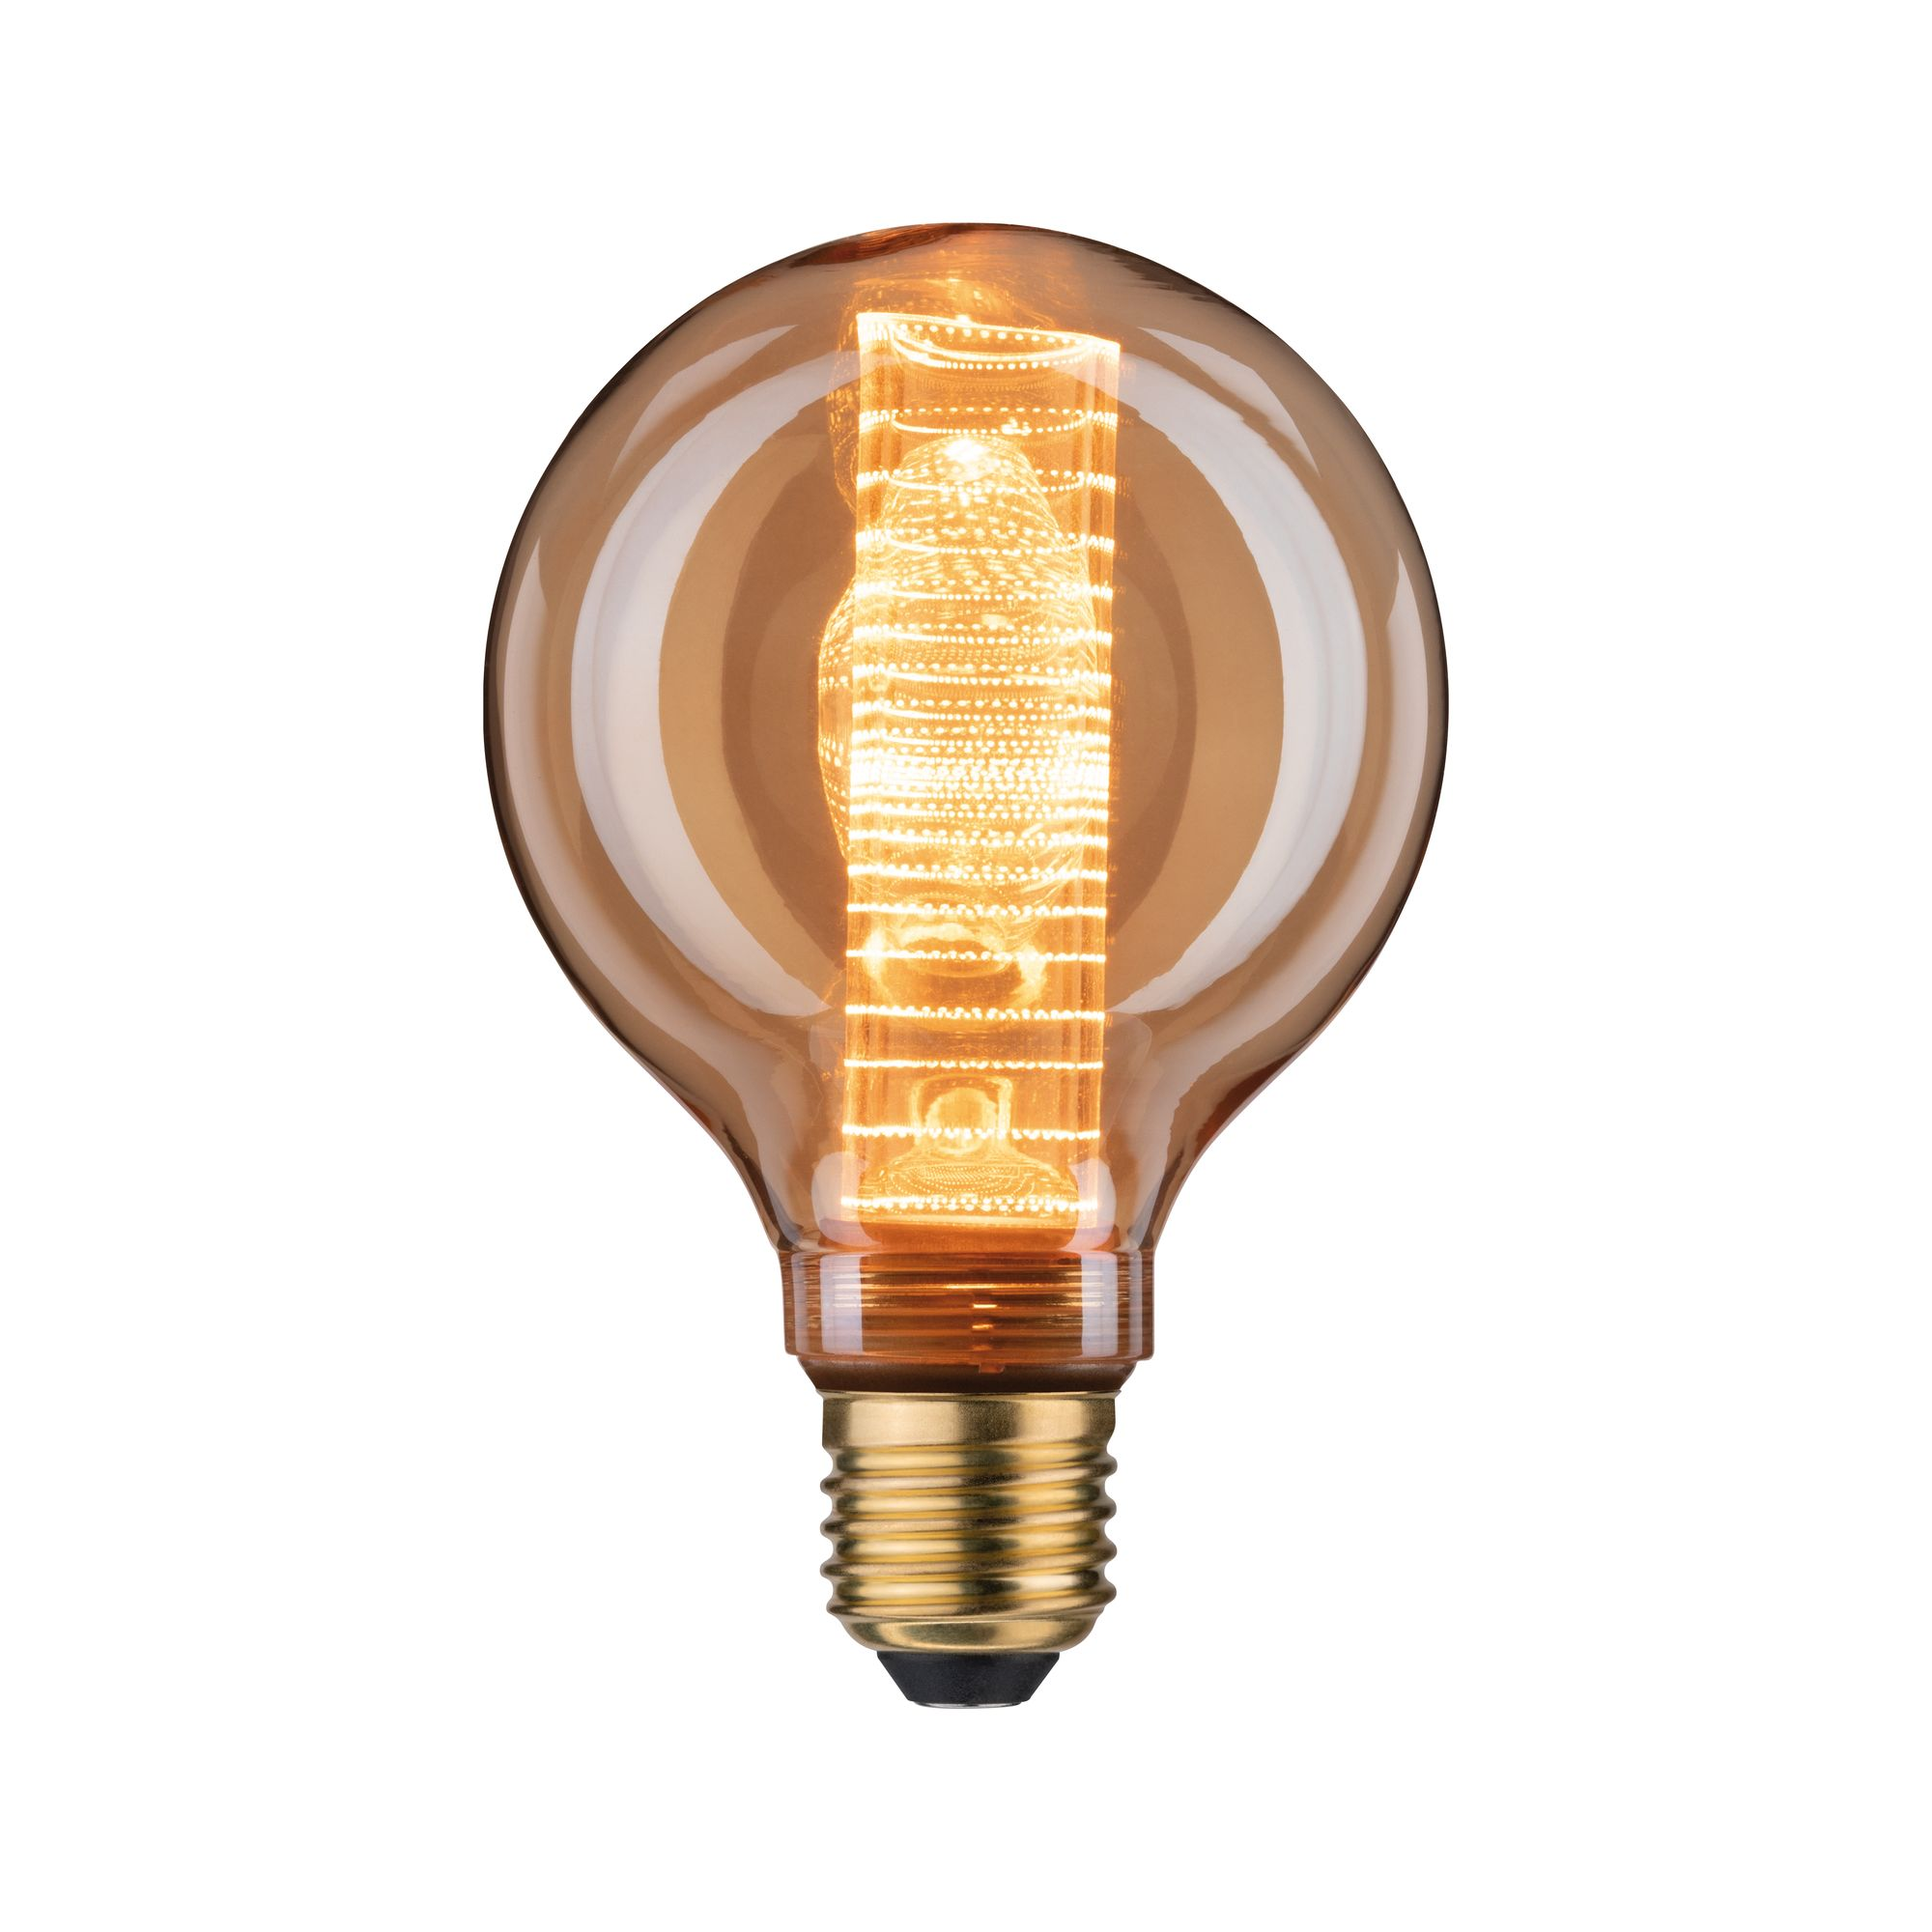 LED-Globe G95 'Inner Glow Spirale' E27 4 W (21 W), 200 lm warmgold + product picture